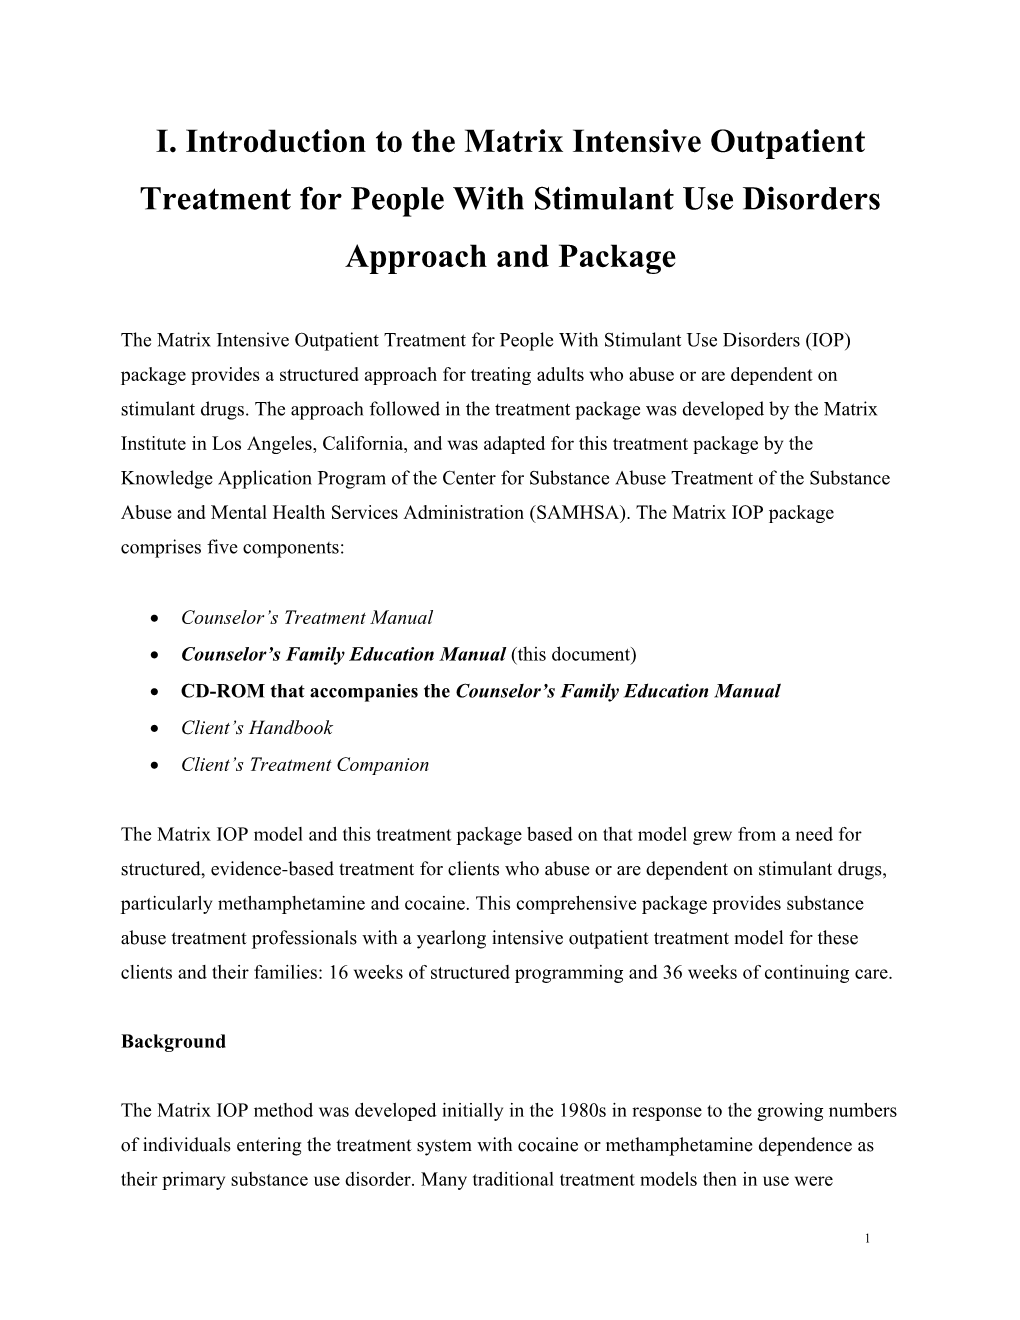 Intensive Outpatient Treatment for Stimulant Use